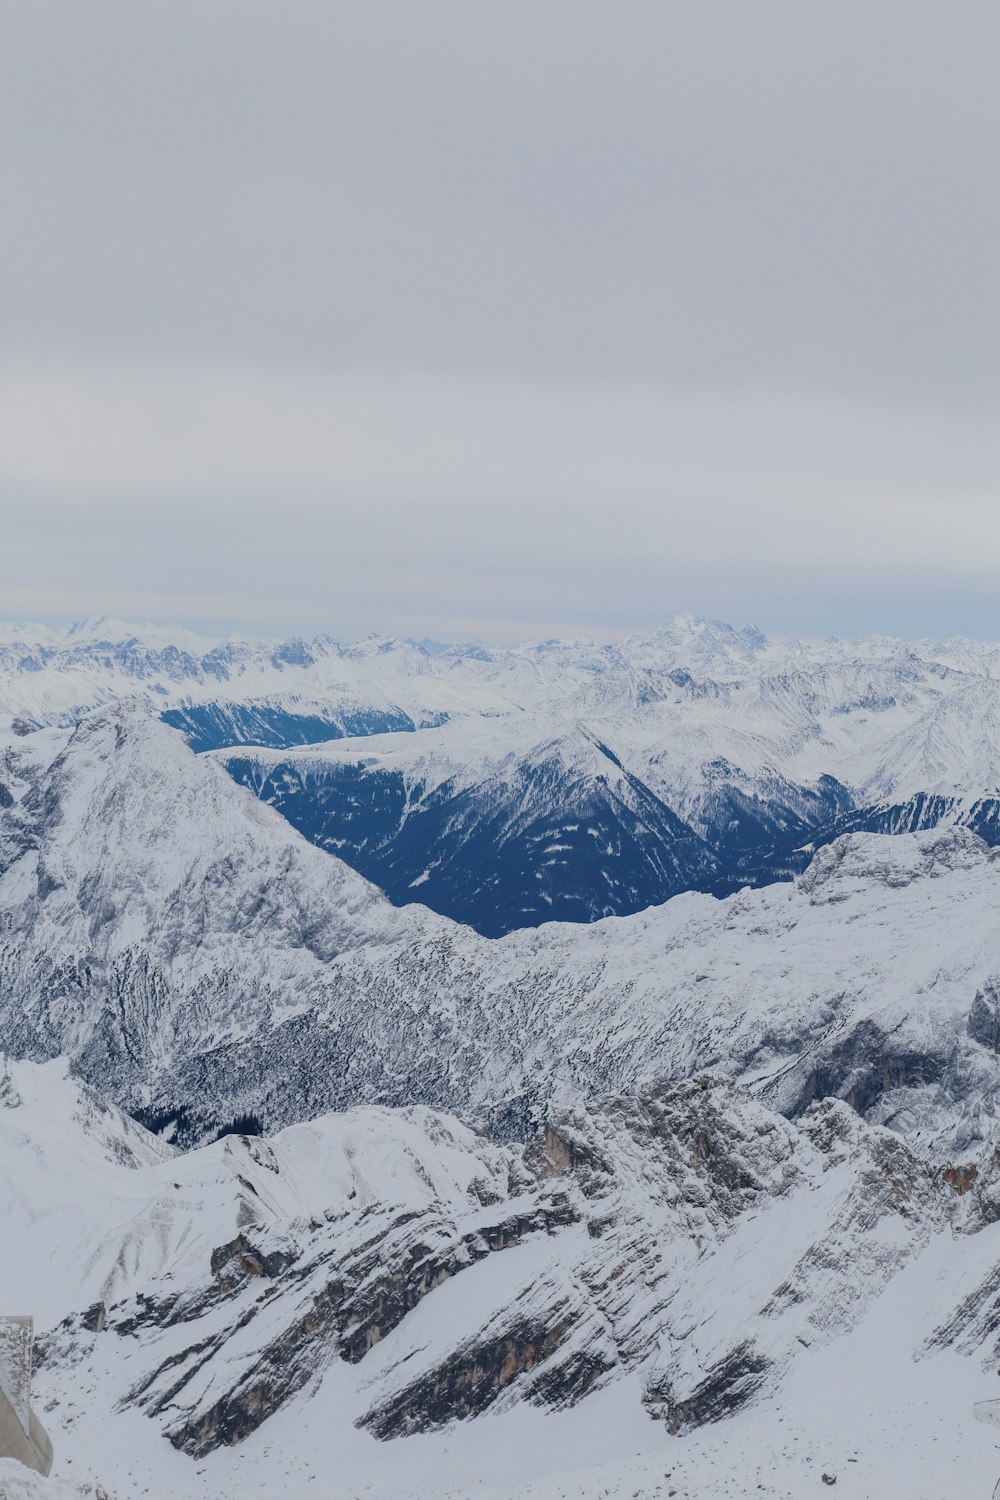 a snowy mountain range with mountains in the distance